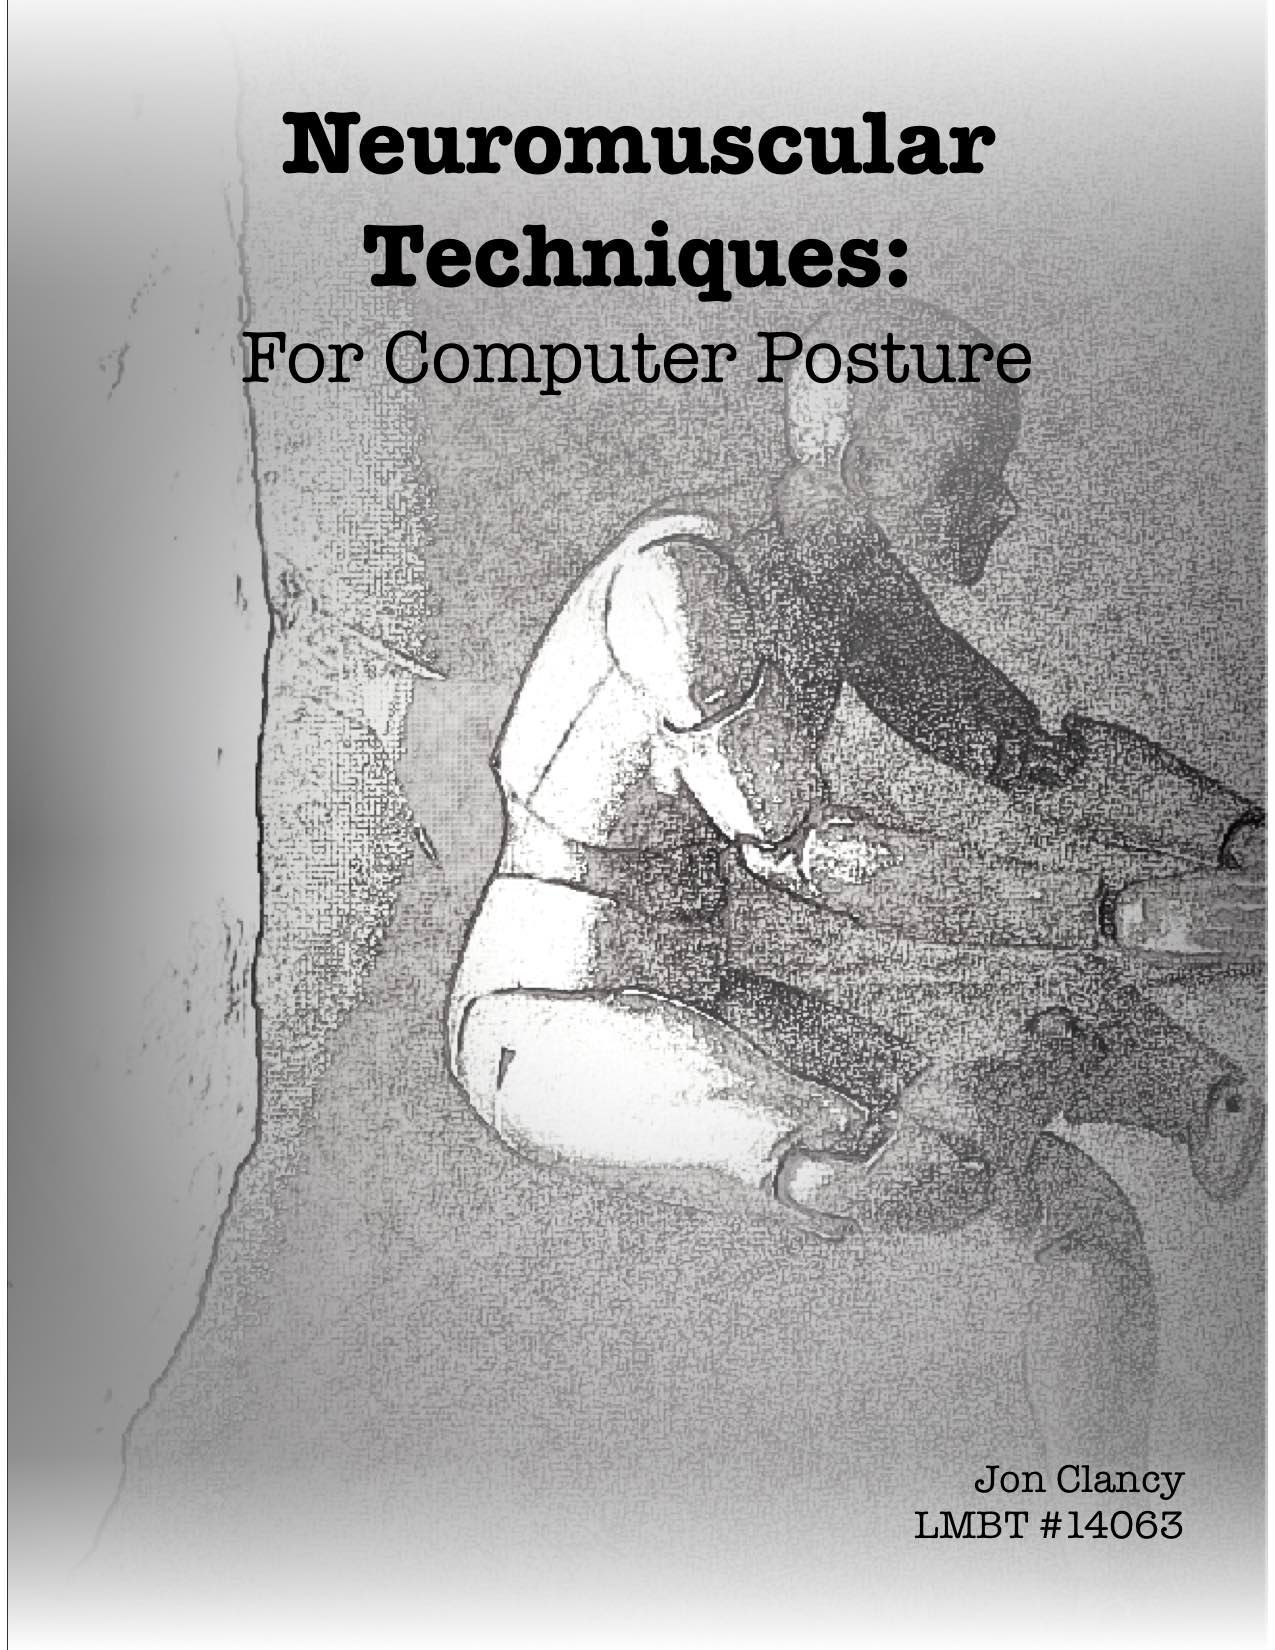 mechanical person sits in front of computer